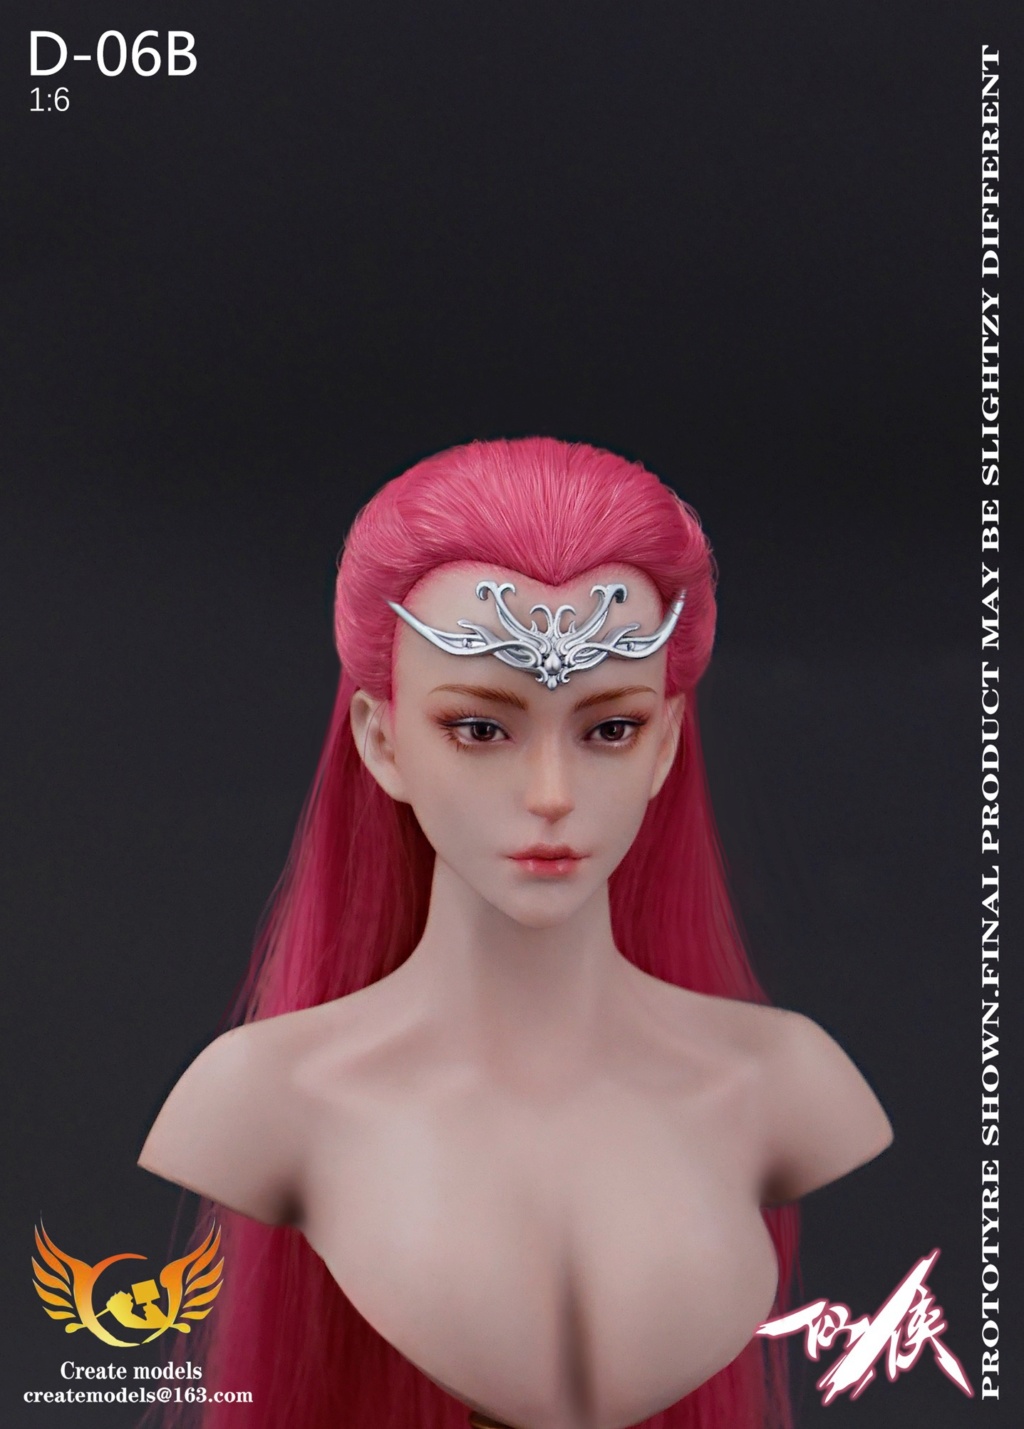 Fantasy - NEW PRODUCT: Createmodels: 1/6 Xianxia series female head - AB two hair colors (D-06) 15340110